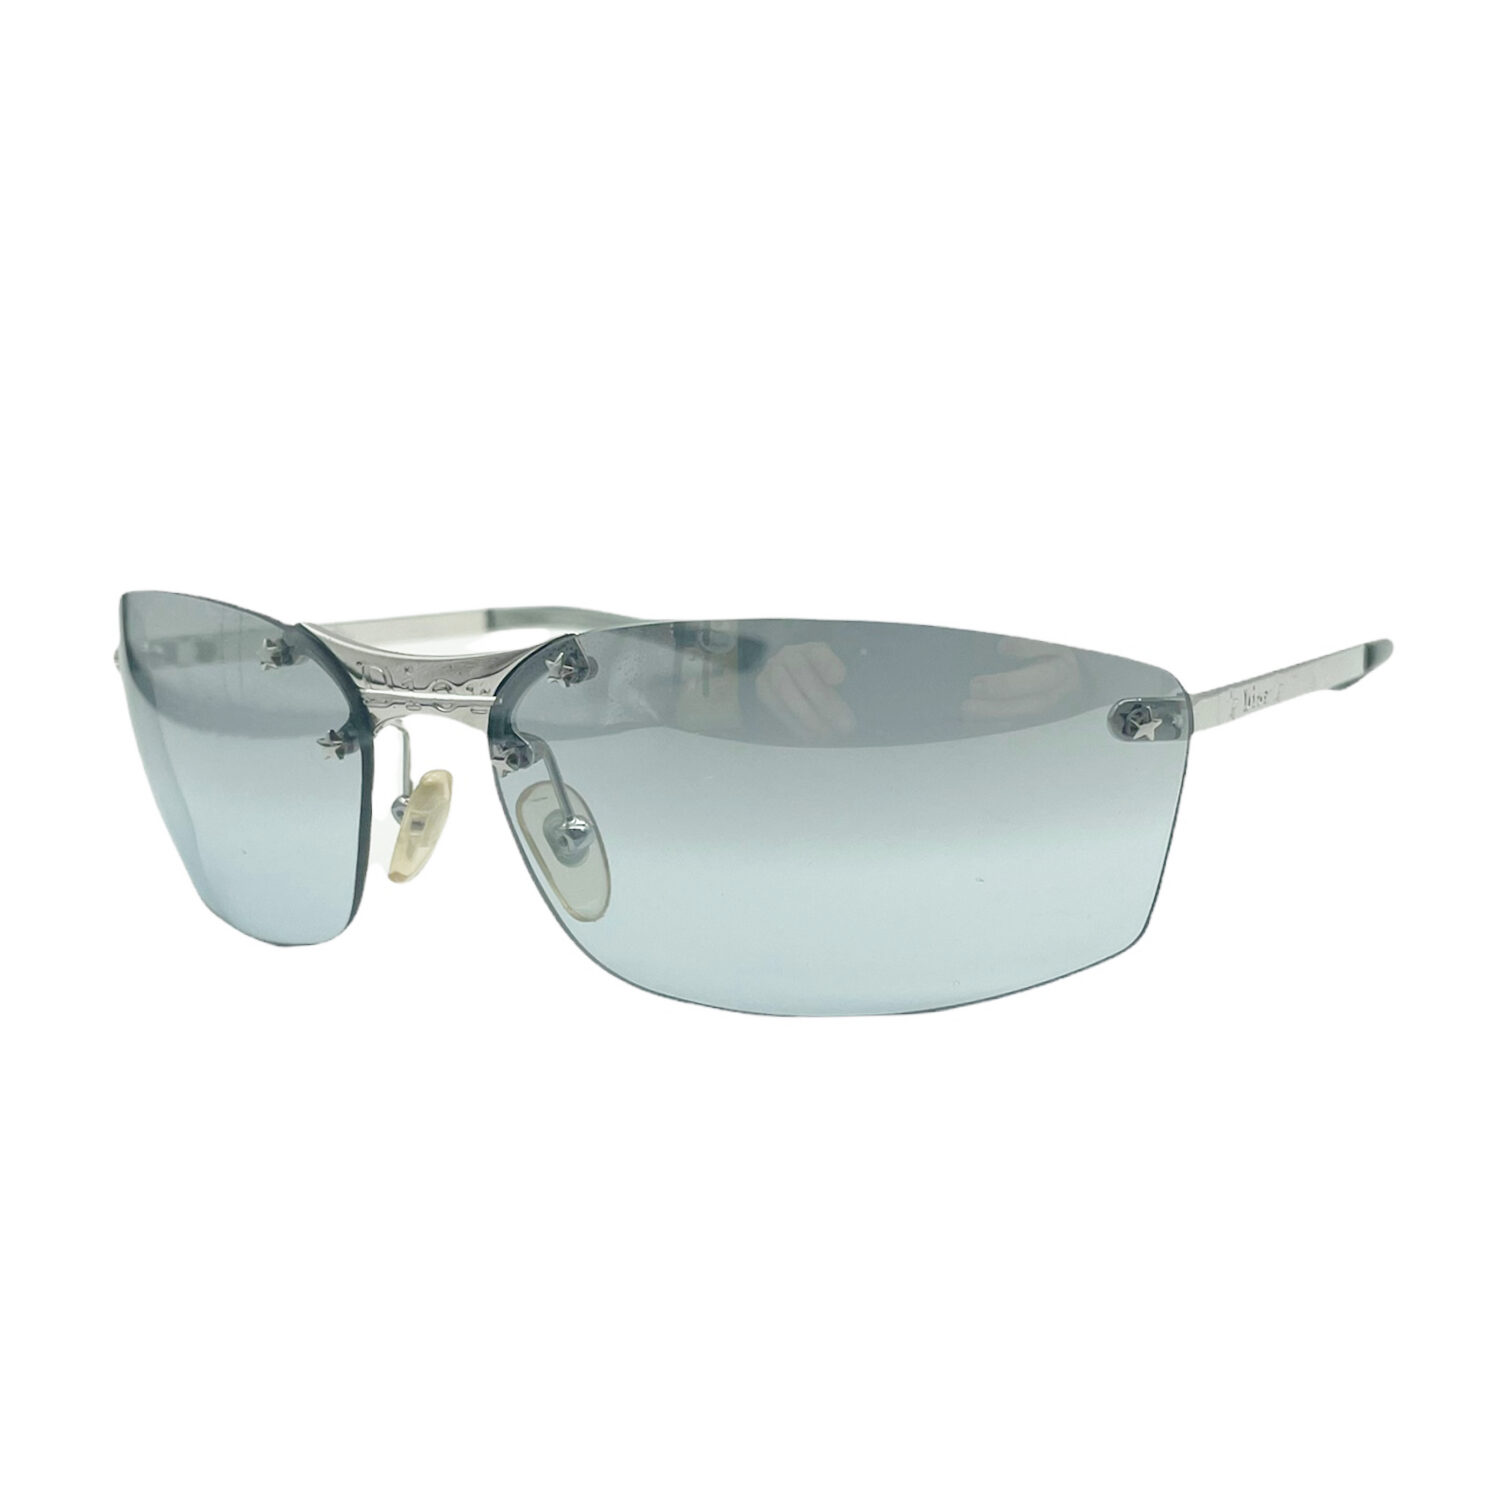 Vintage Dior Rimless Tinted Sunglasses in Baby Blue and Silver | NITRYL